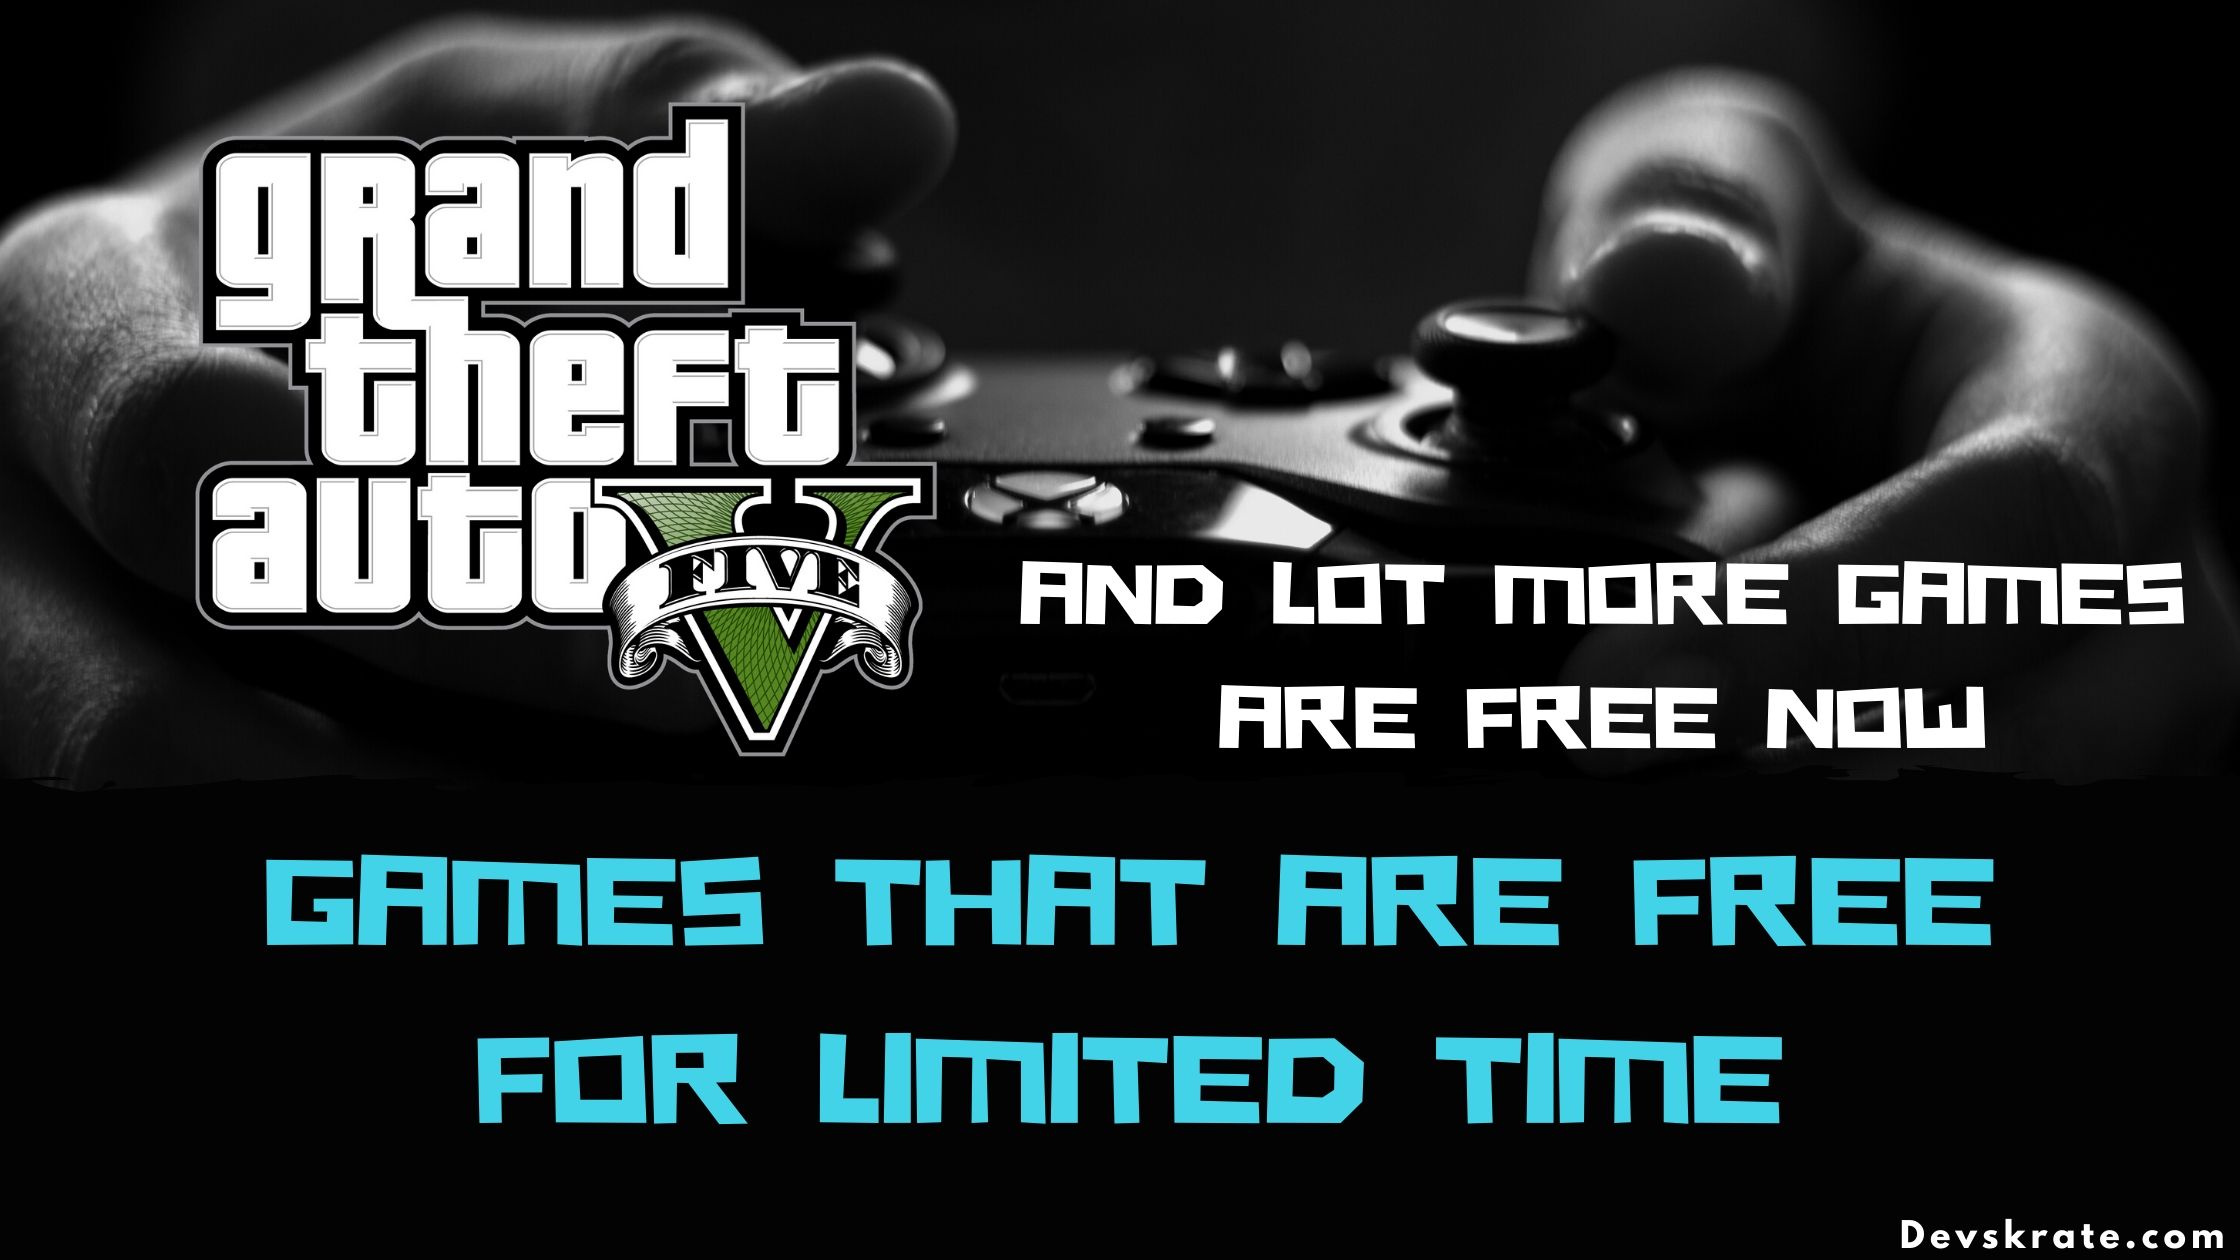 GTA V for free and more other popular games for a limited time